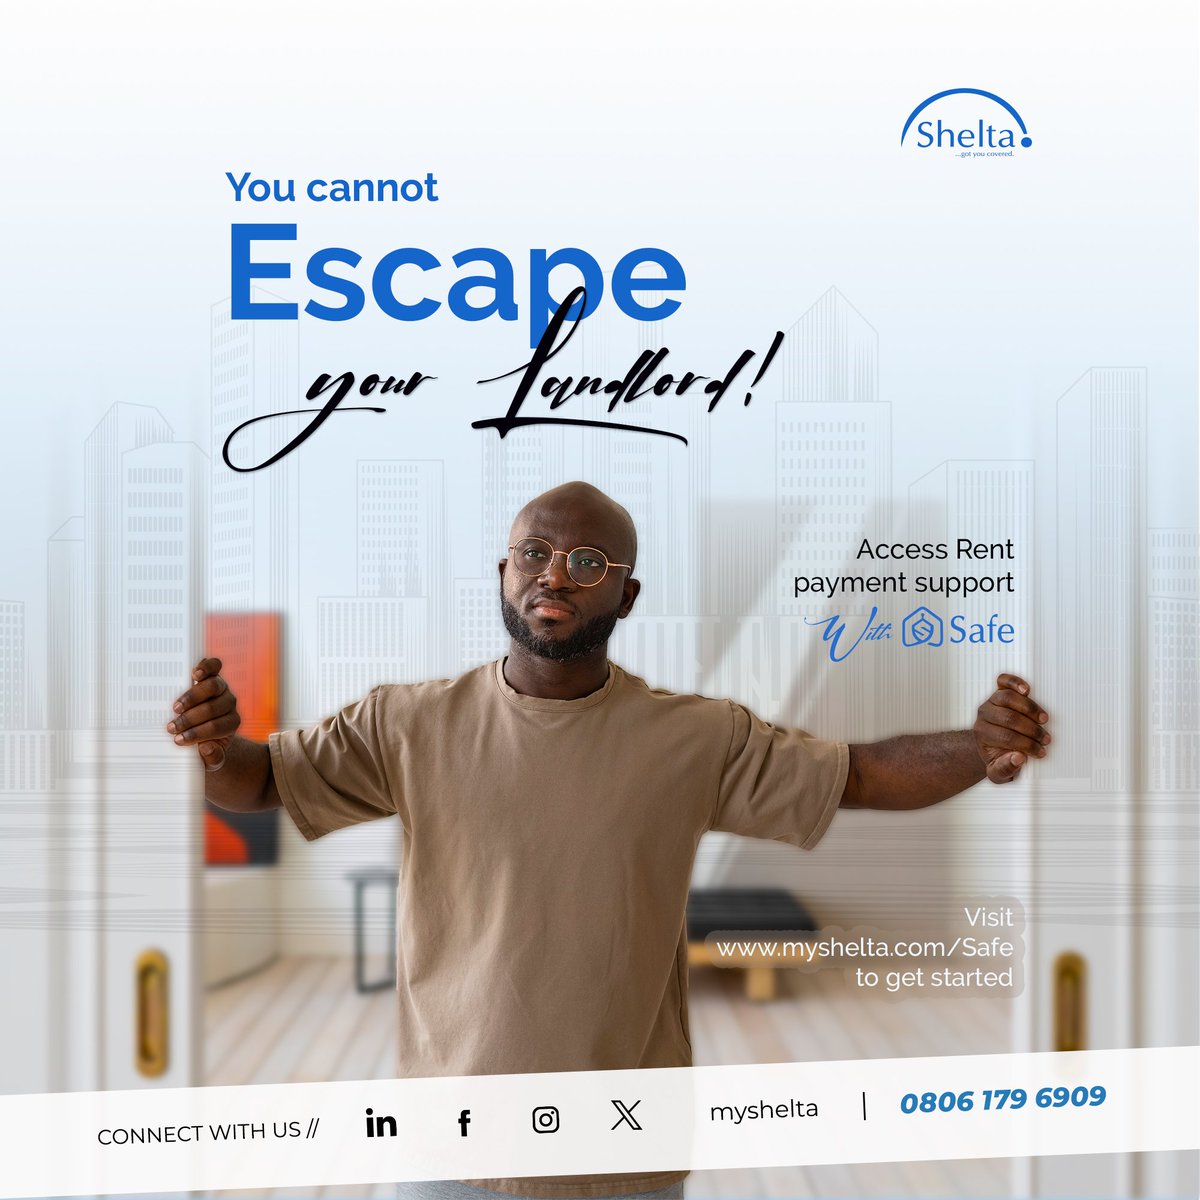 You Cannot Escape your Landlord! But Shelta got you covered with easy and convenient rent solutions Tenants can fund with SAFE at their will; ● Daily ● Weekly ● Monthly This includes GAP-FINANCING - A solution where Tenants can fund their rent even when experiencing…